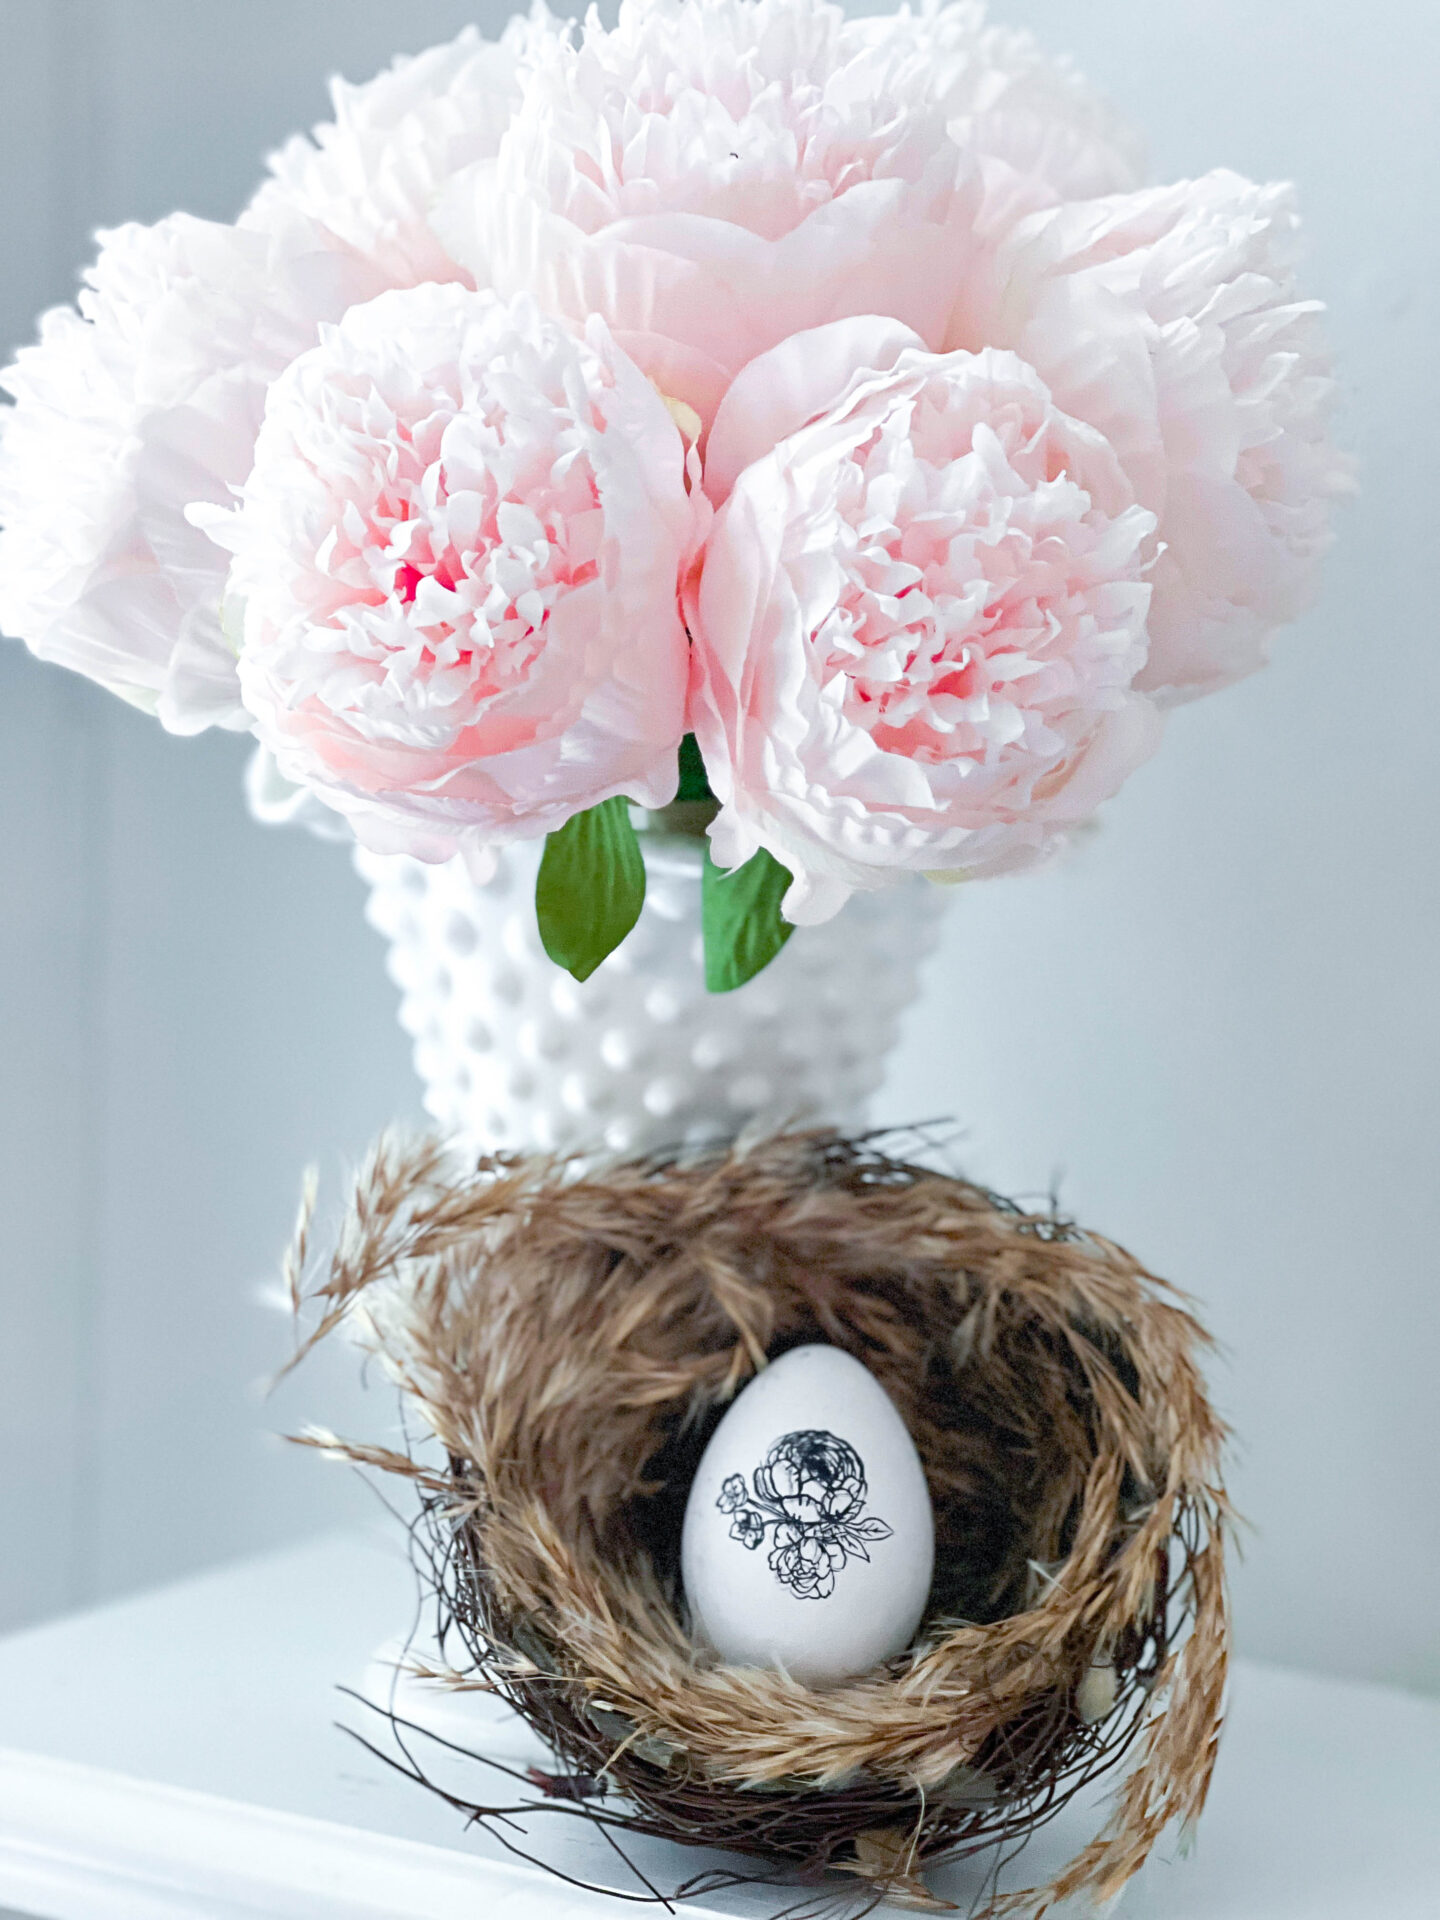 Stamped Eggs for Spring – Thrifty Style Team